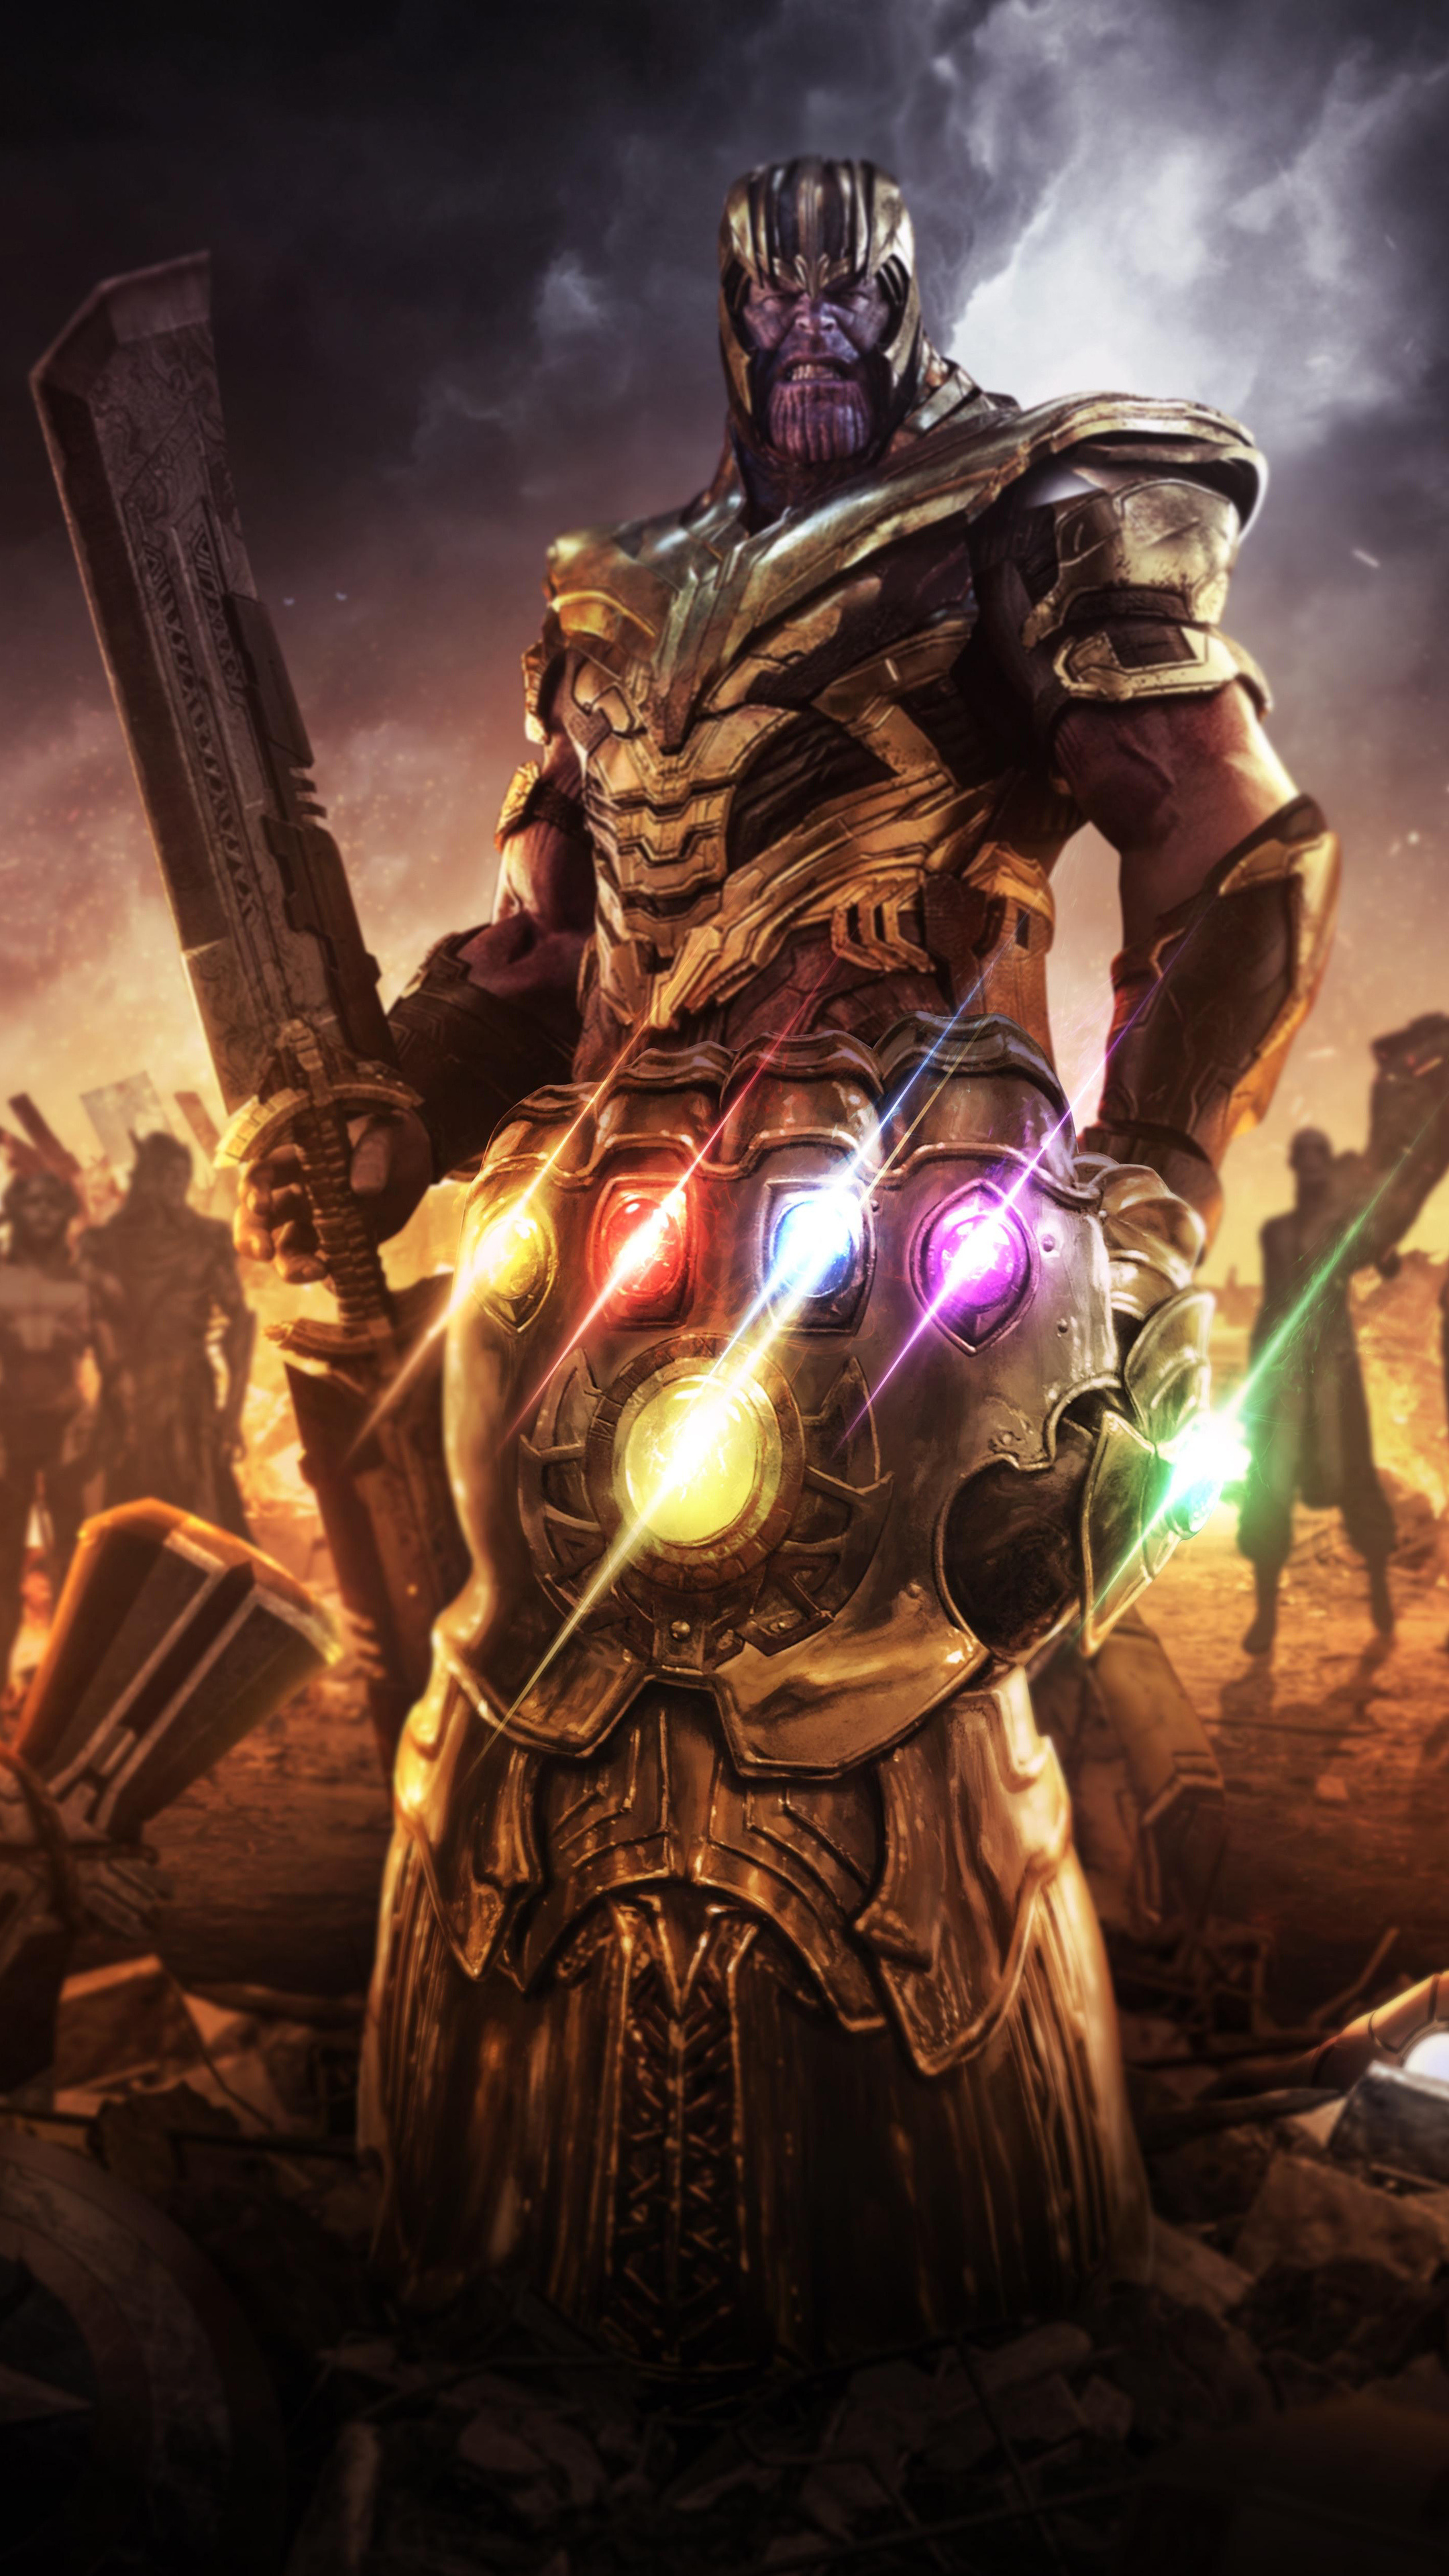 Infinity Gauntlet, Endgame climax, Xperia wallpapers, Immersive 4K experience, 2160x3840 4K Phone